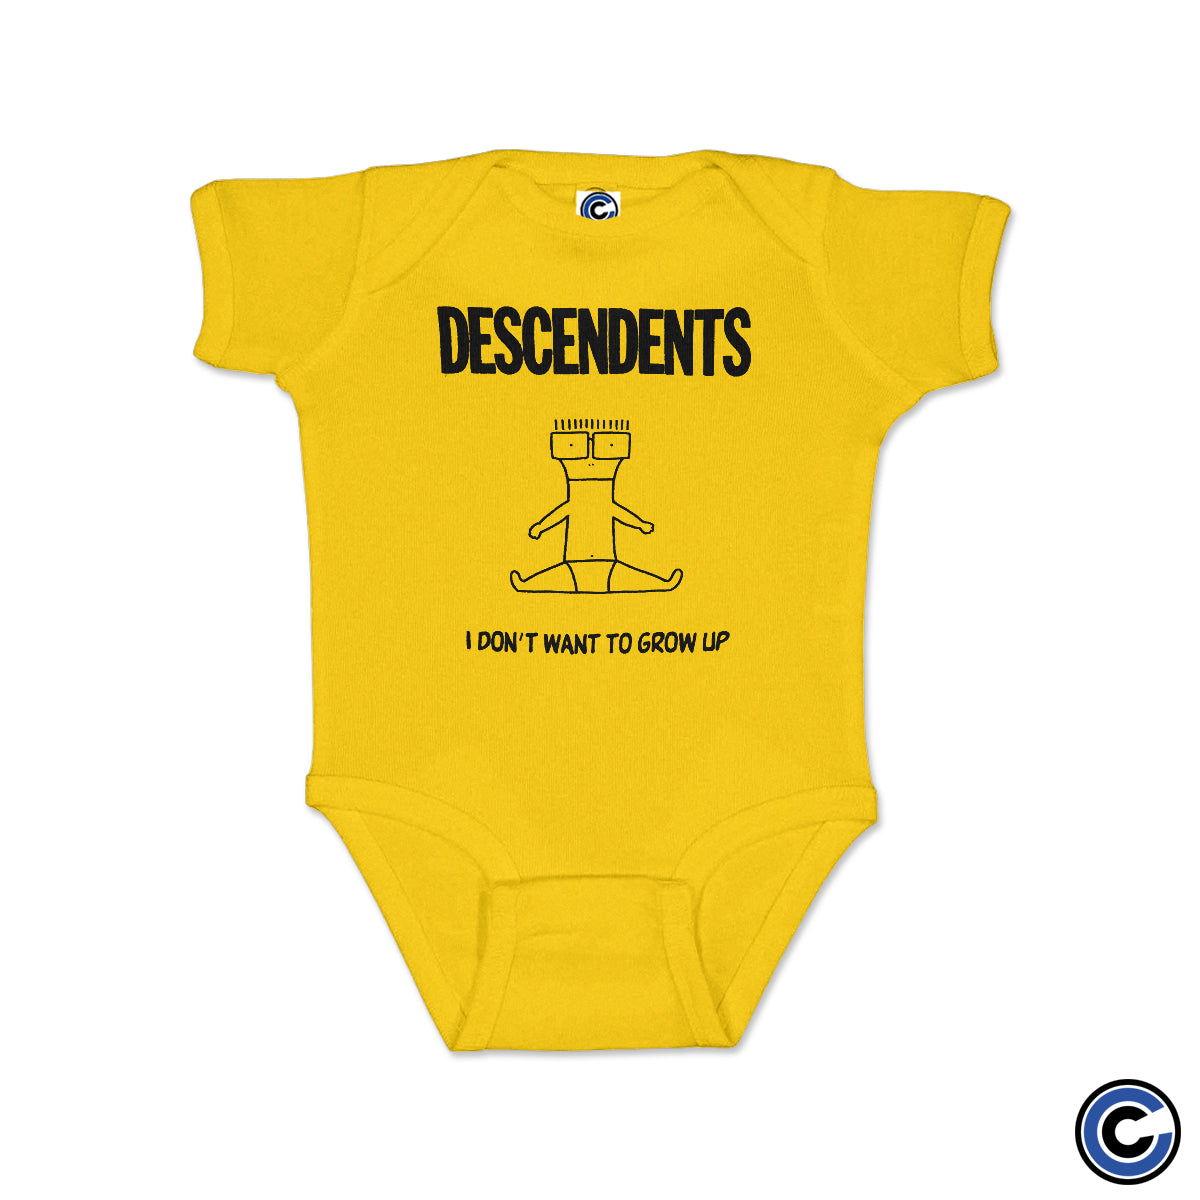 Descendents "I Don't Want To Grow Up" Onesie